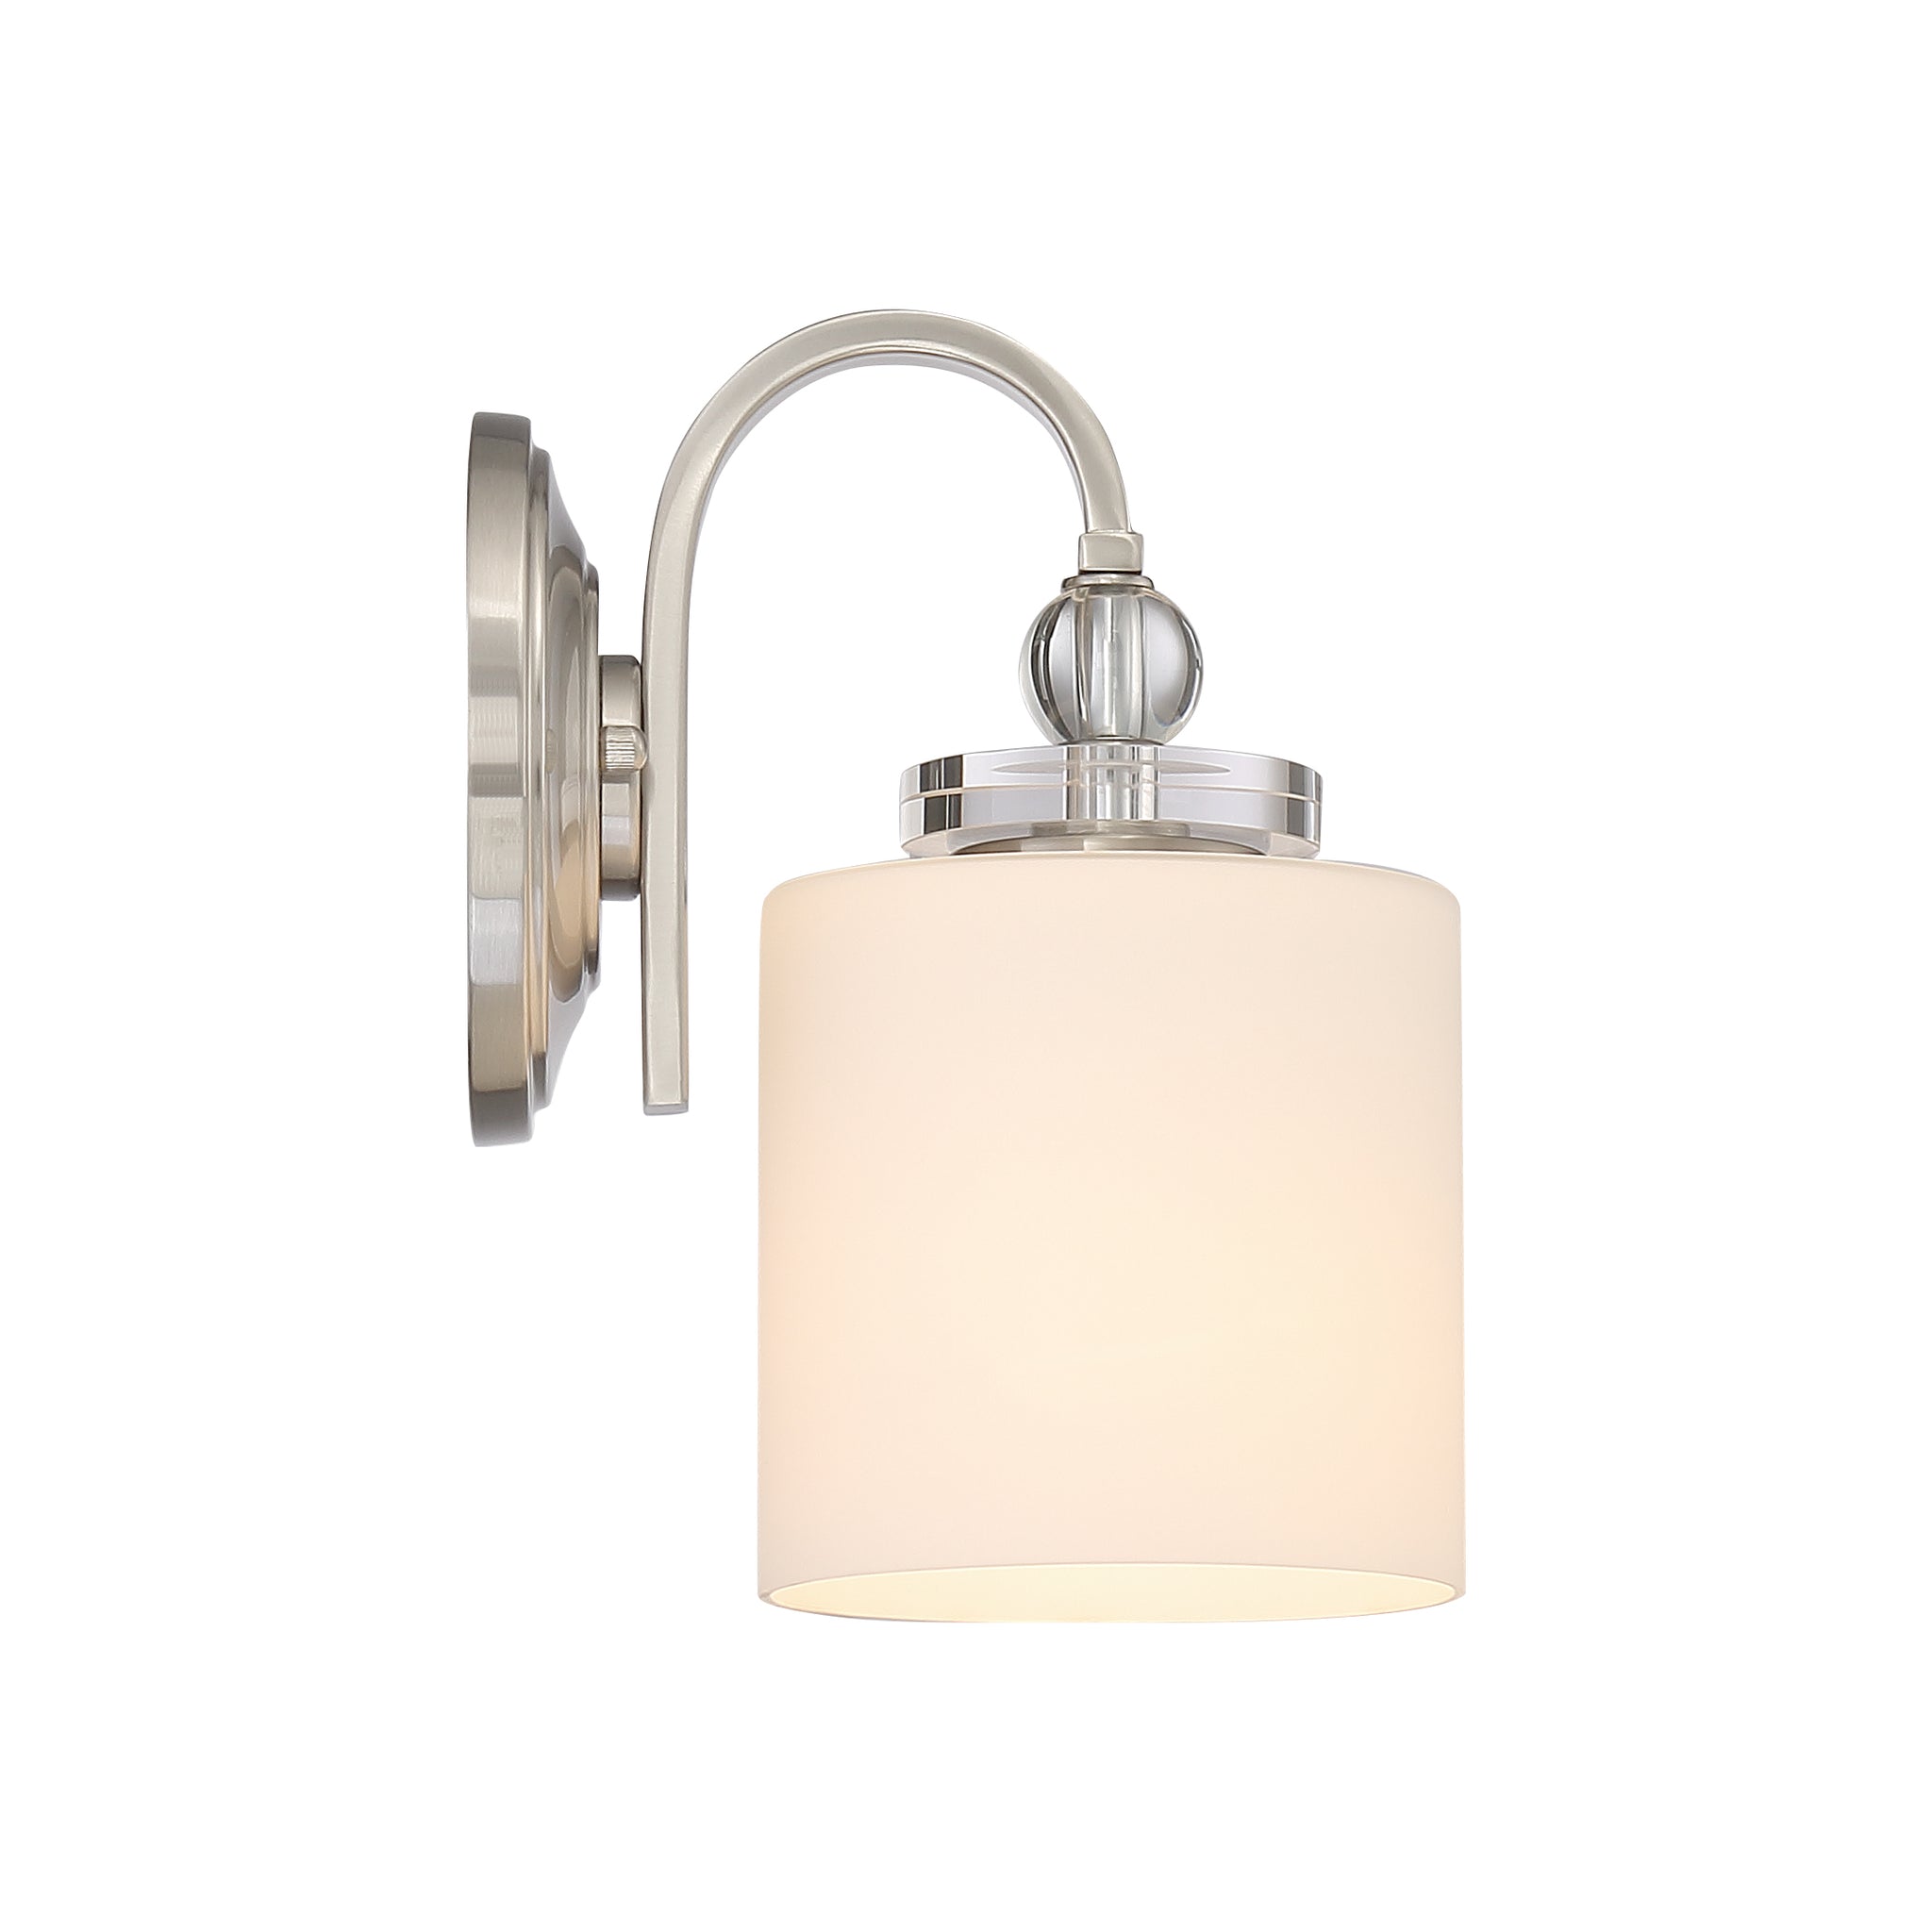 Downtown Sconce Brushed Nickel